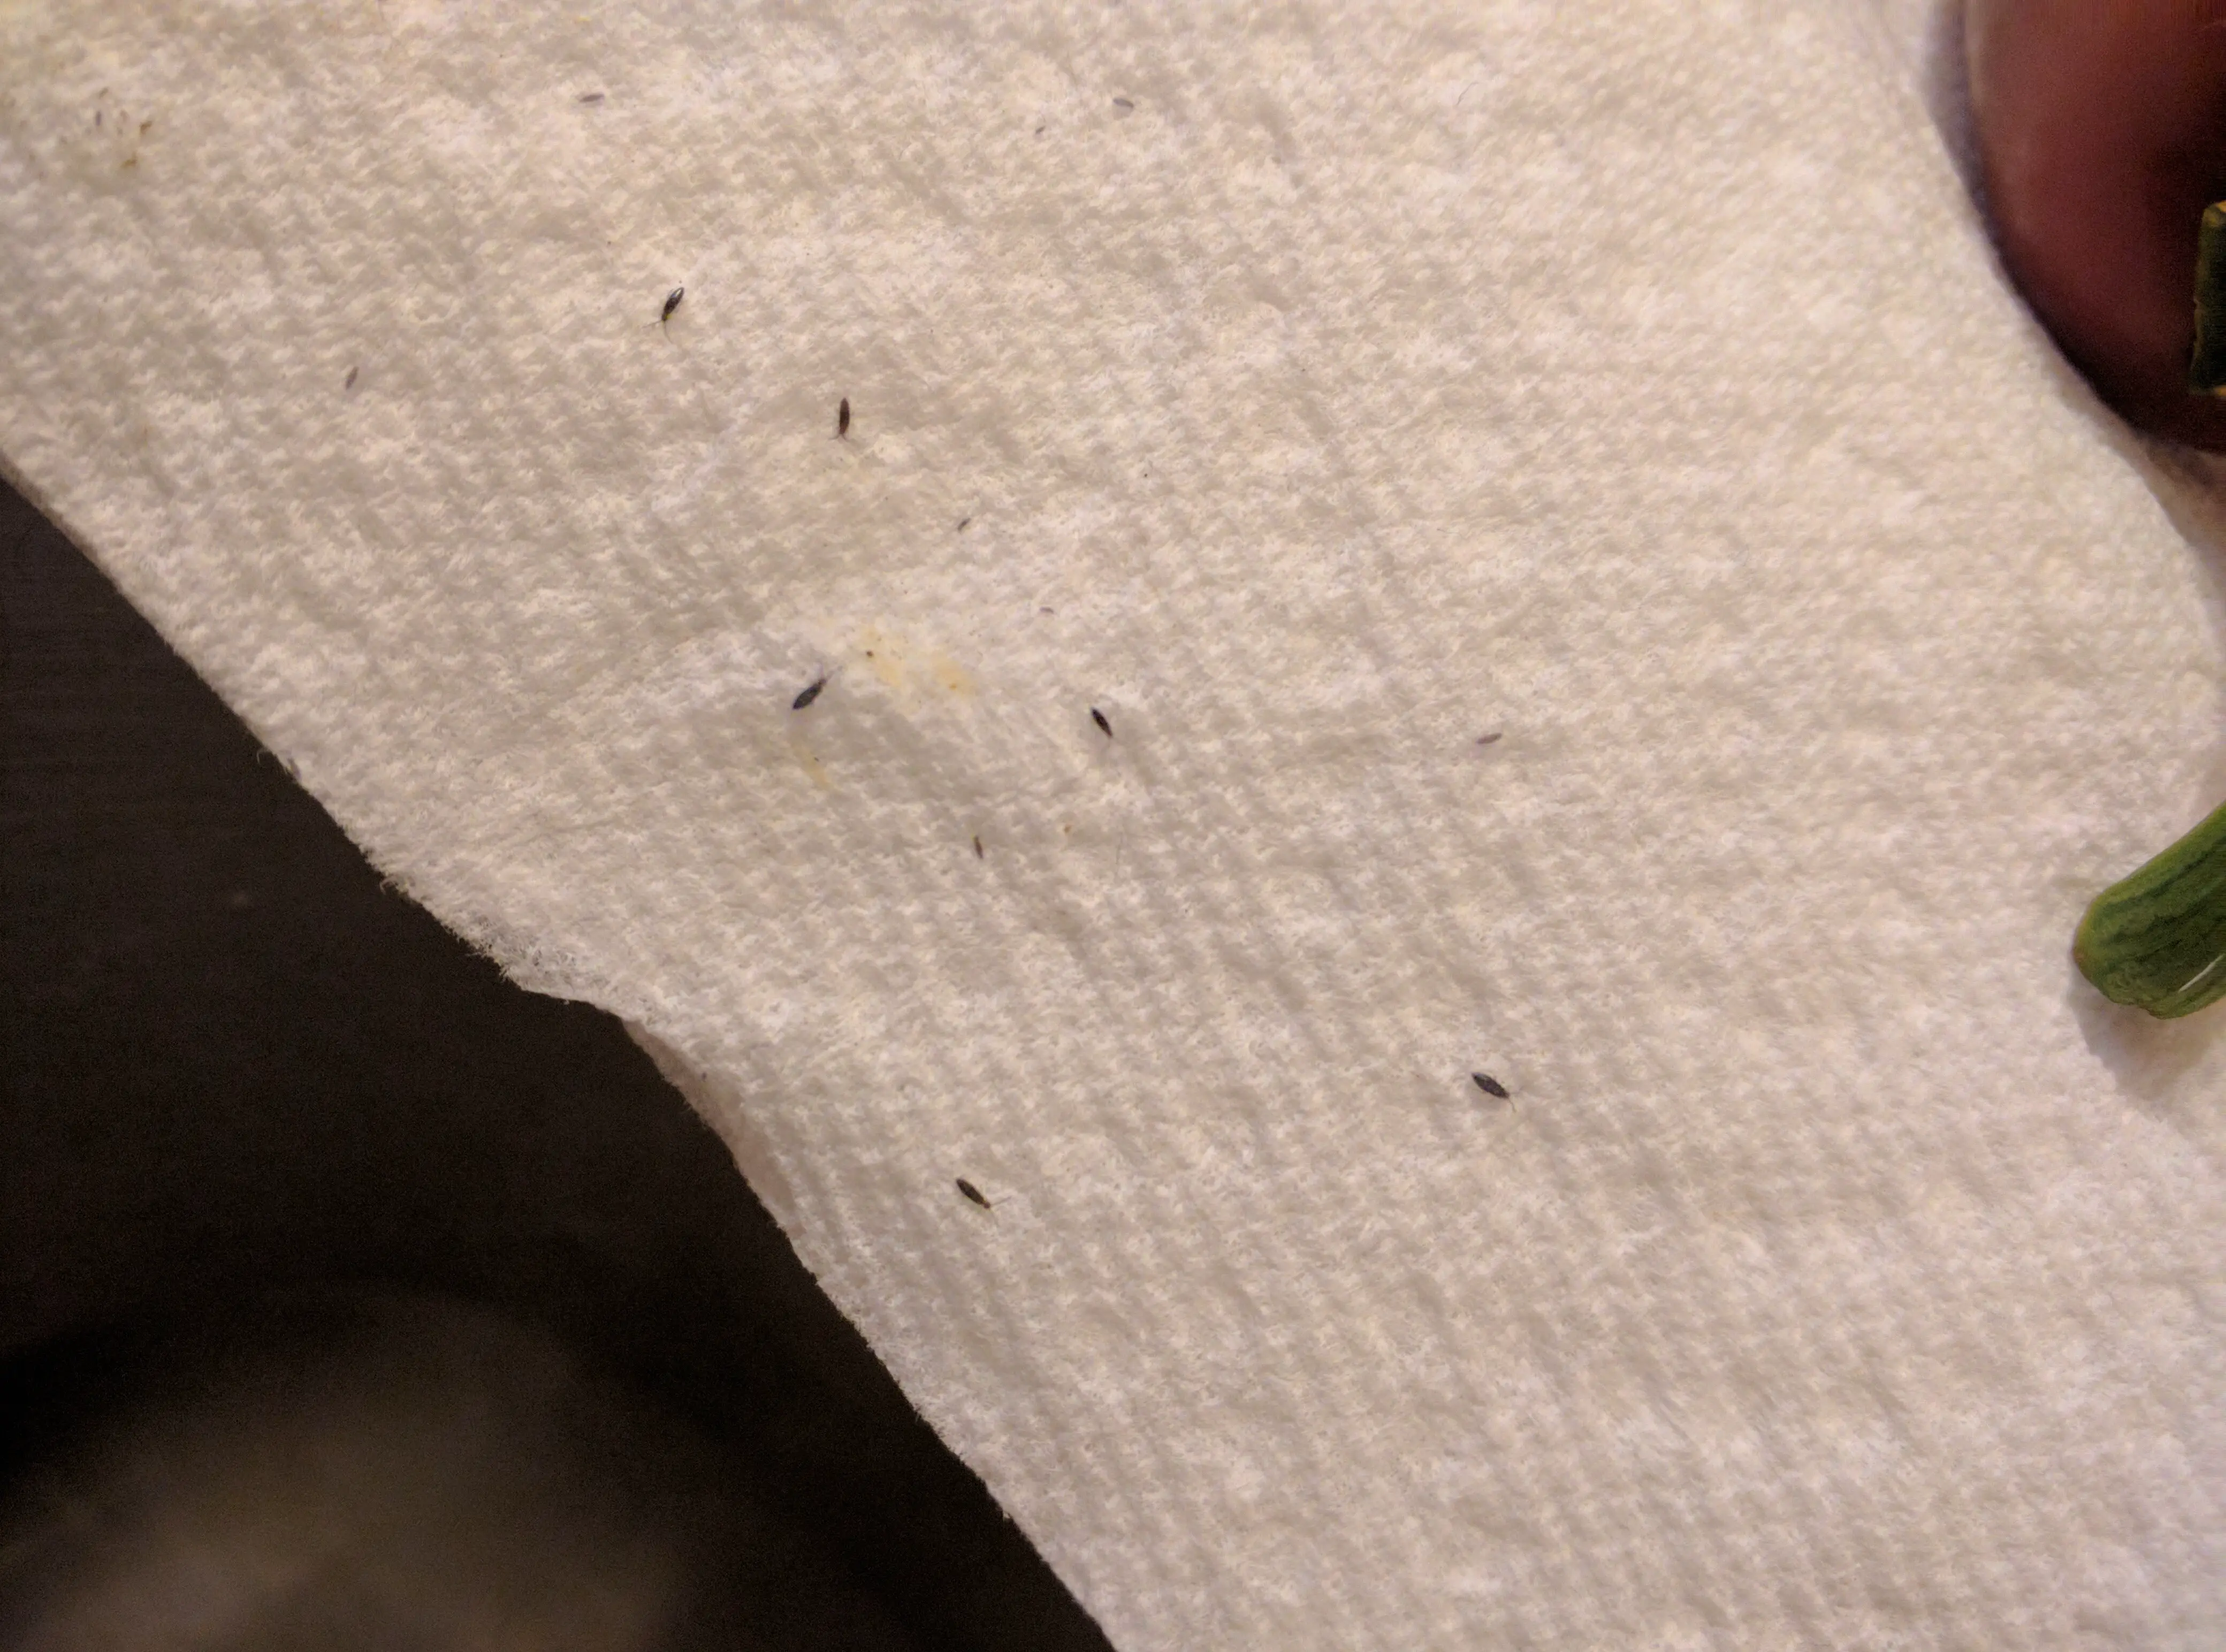 Tiny Black Bugs In Kitchen Pest Guide, Tiny Black Bugs In My Kitchen Cupboard